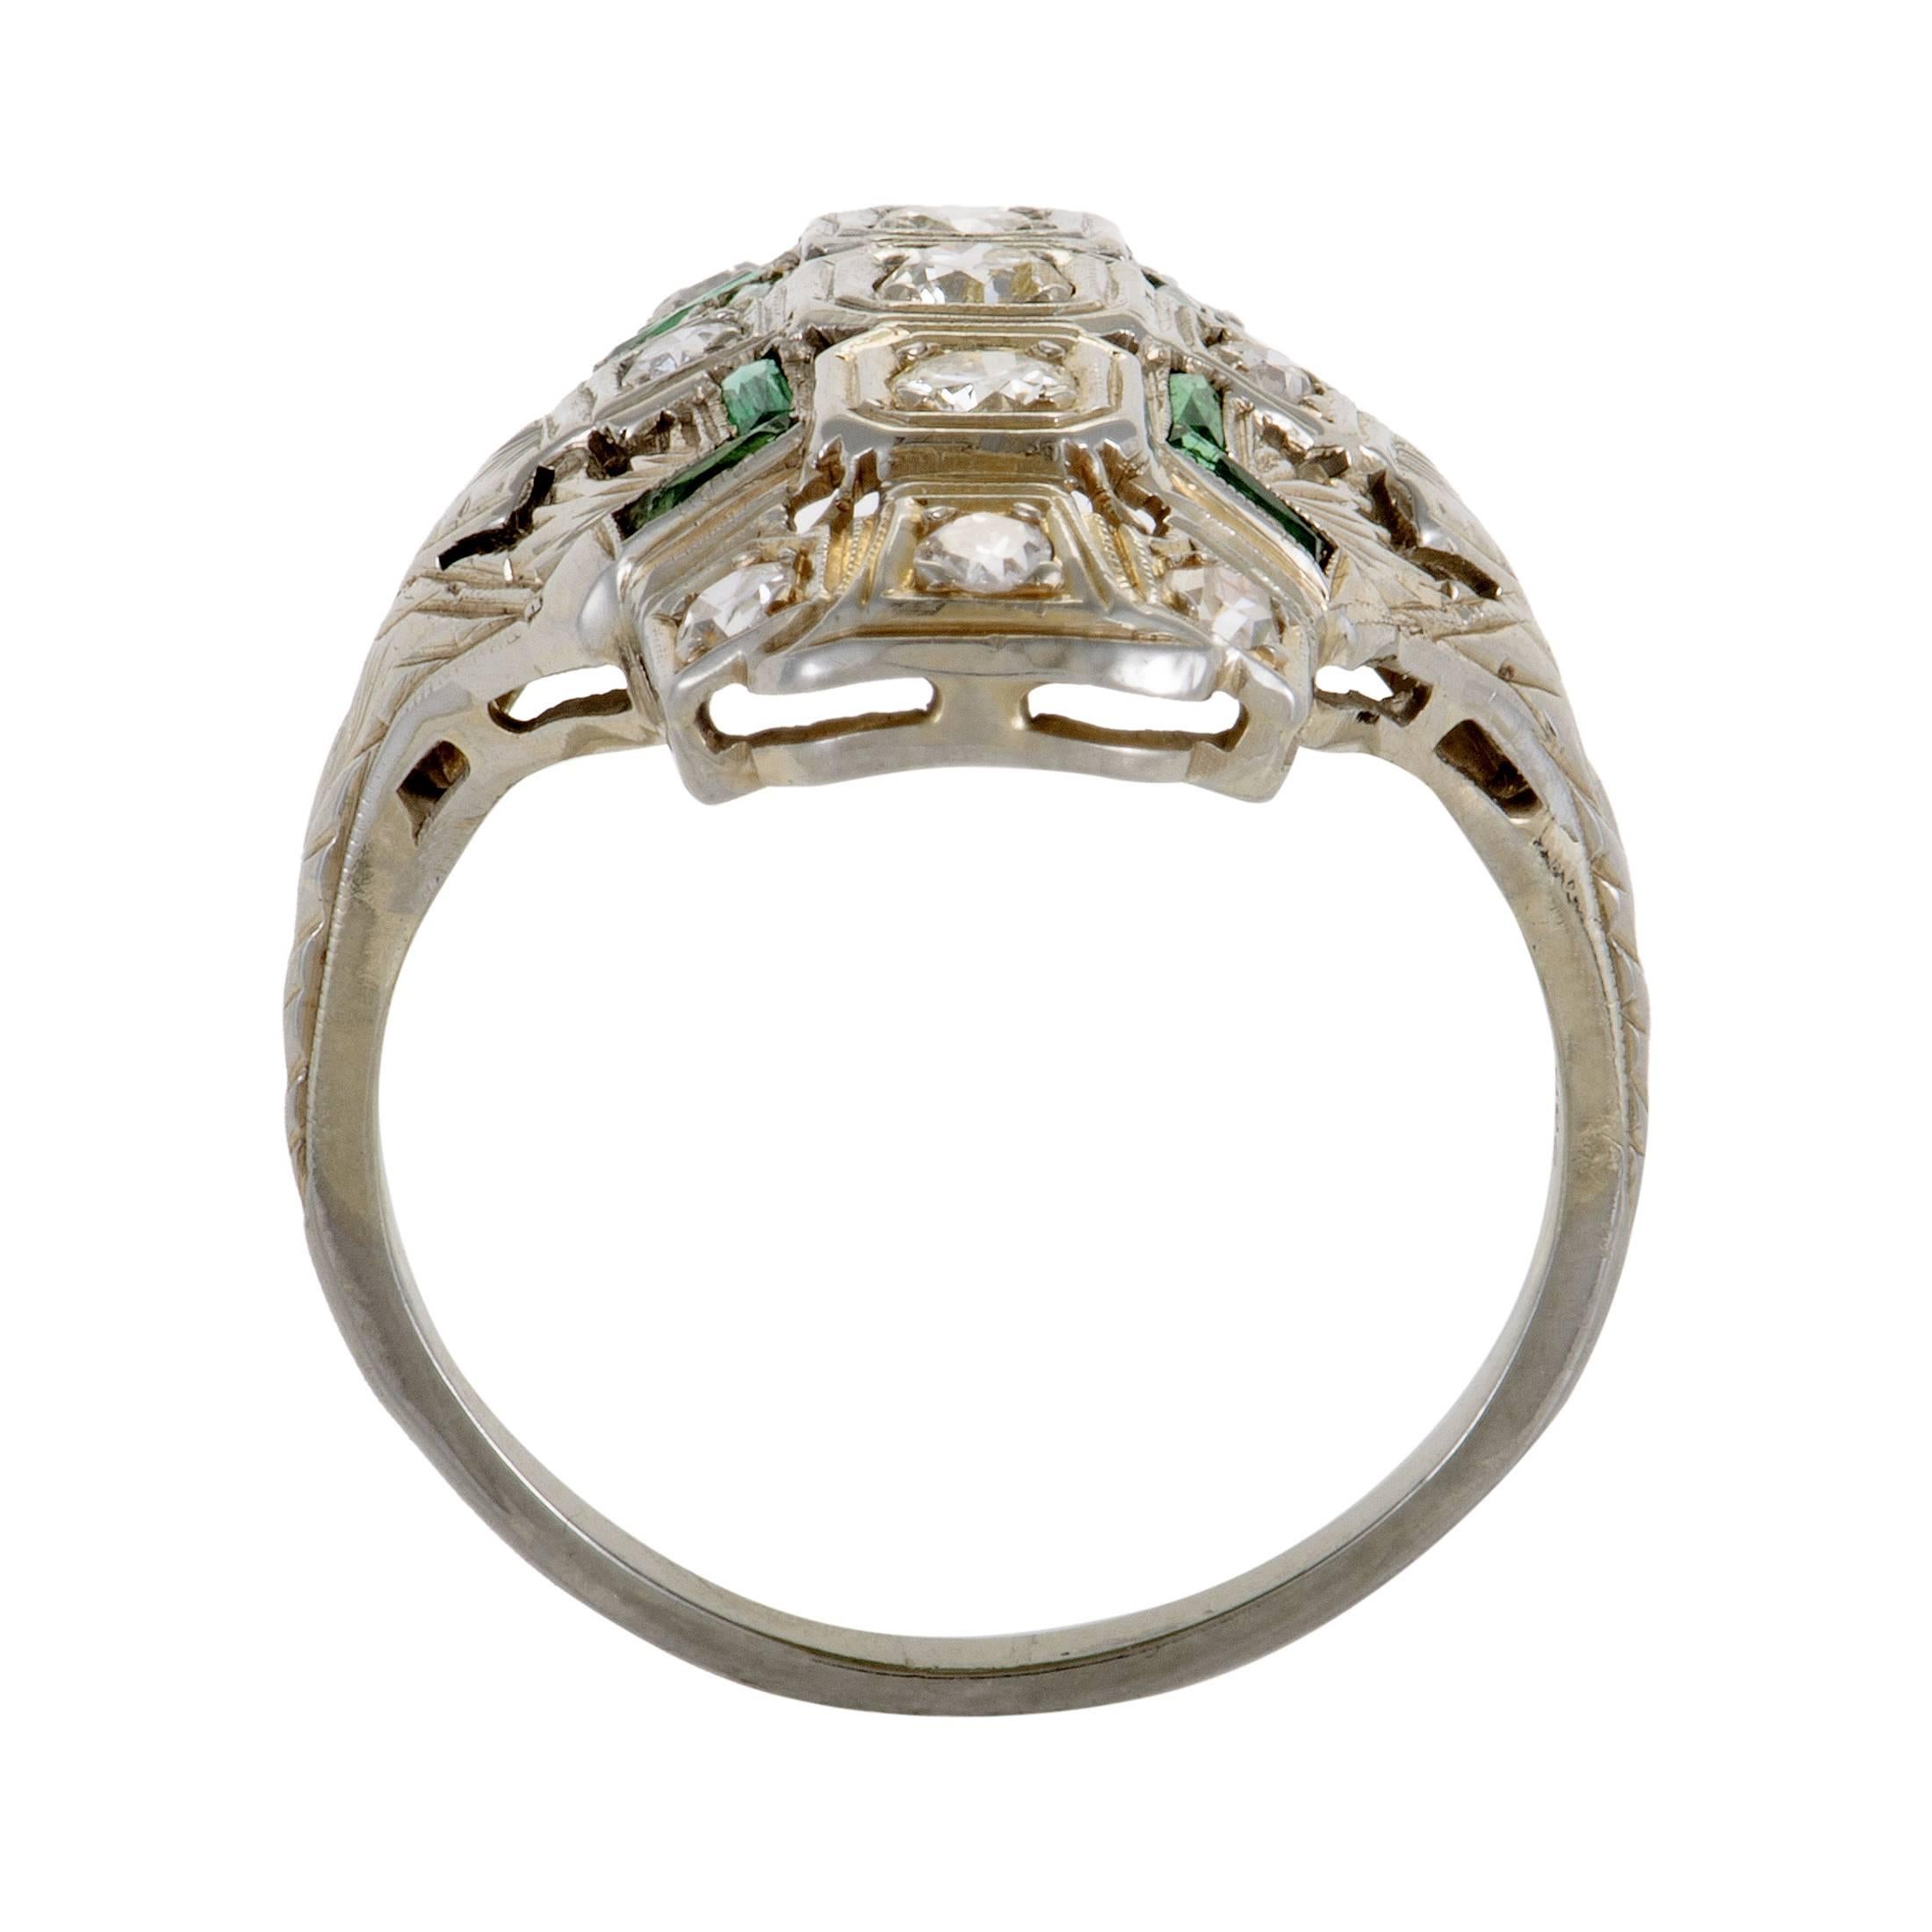 Wonderfully arranged across the splendidly bright surface of 18K white gold, the resplendent diamonds amounting to 0.50ct and precious emeralds weighing in total 0.30ct produce an exceptional allure in this fascinating ring.